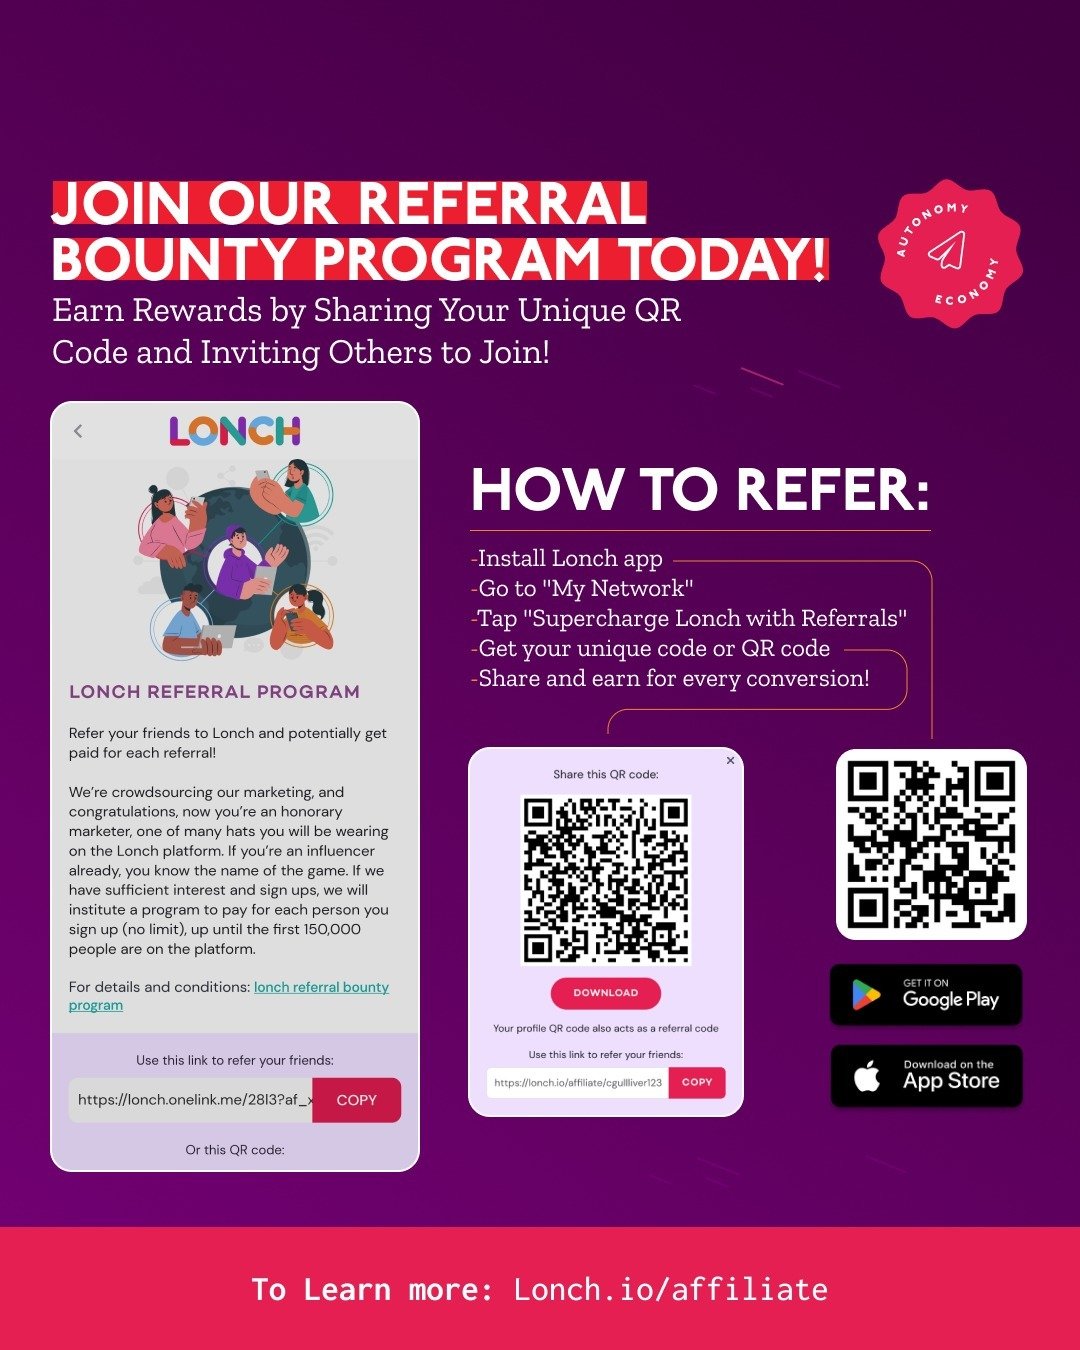 Lonch Referral Bounty Program &ndash; an opportunity to secure a steady revenue stream for the next decade! Simply refer friends, help expand our community, and reap generous rewards for each new member you bring aboard. The more, the merrier!

Wonde